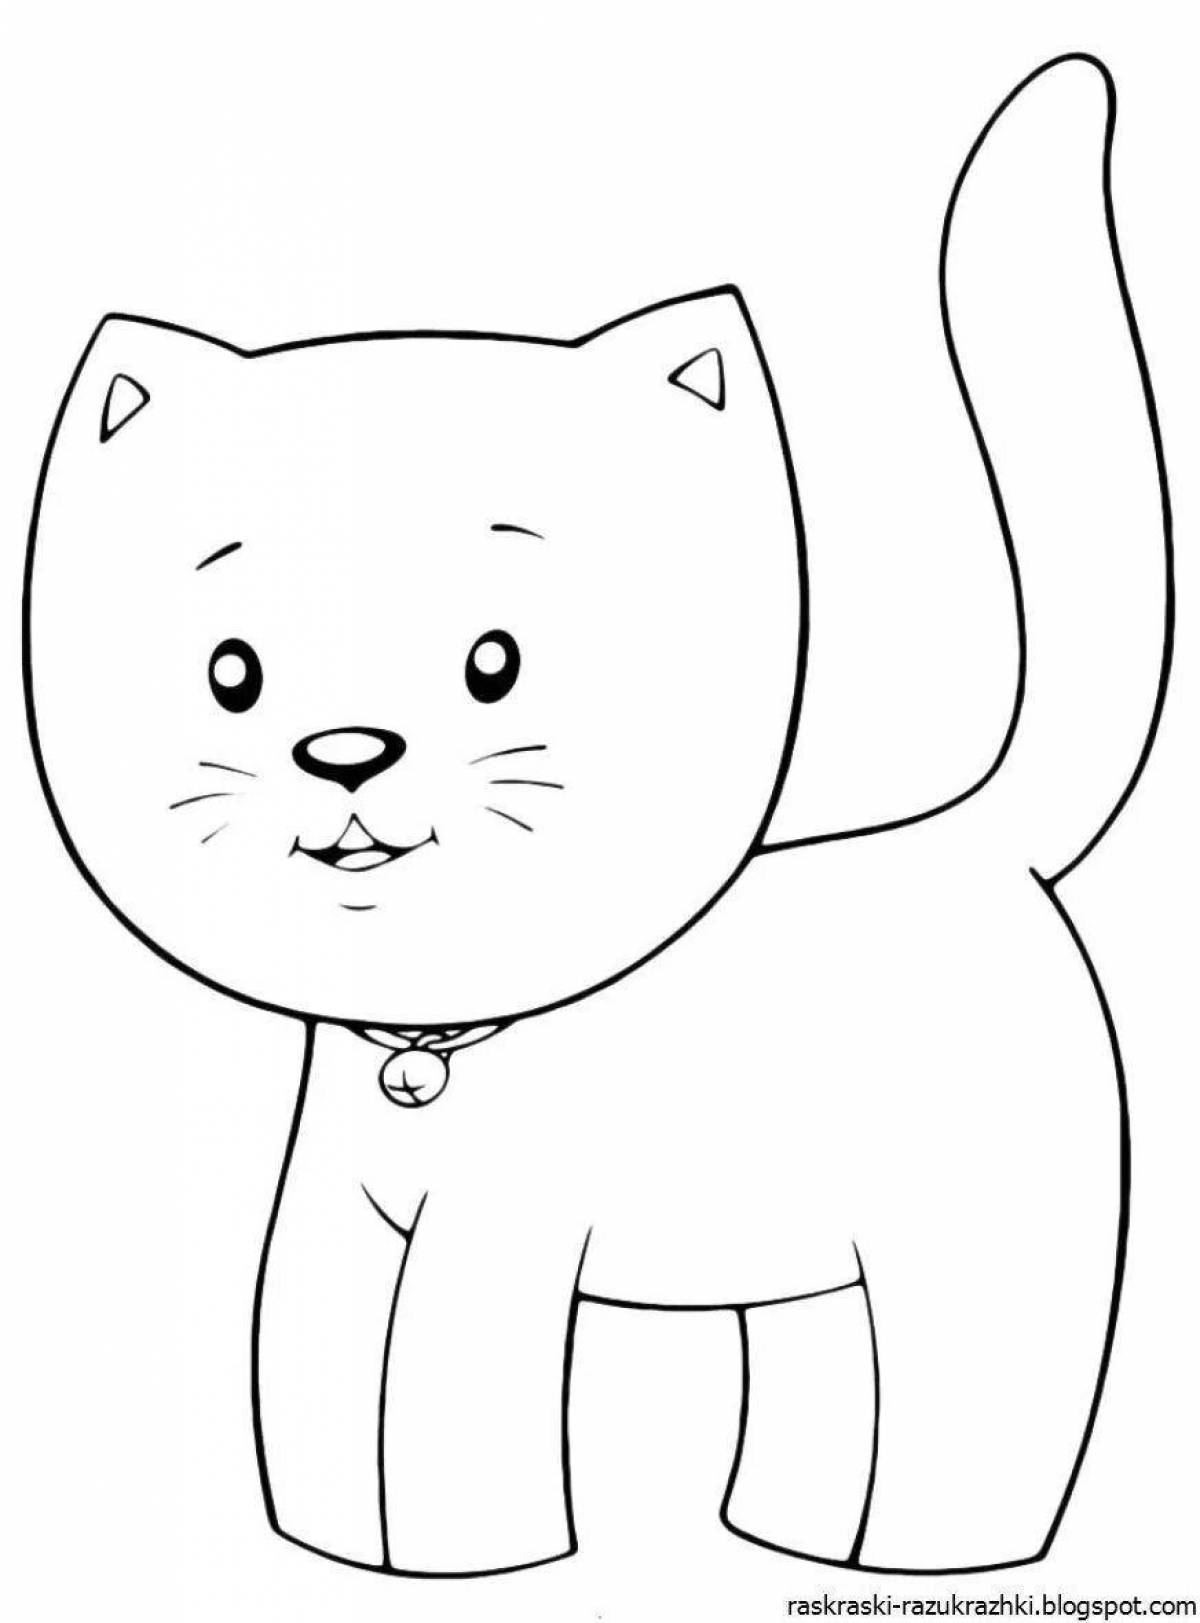 Adorable cat coloring page for toddlers